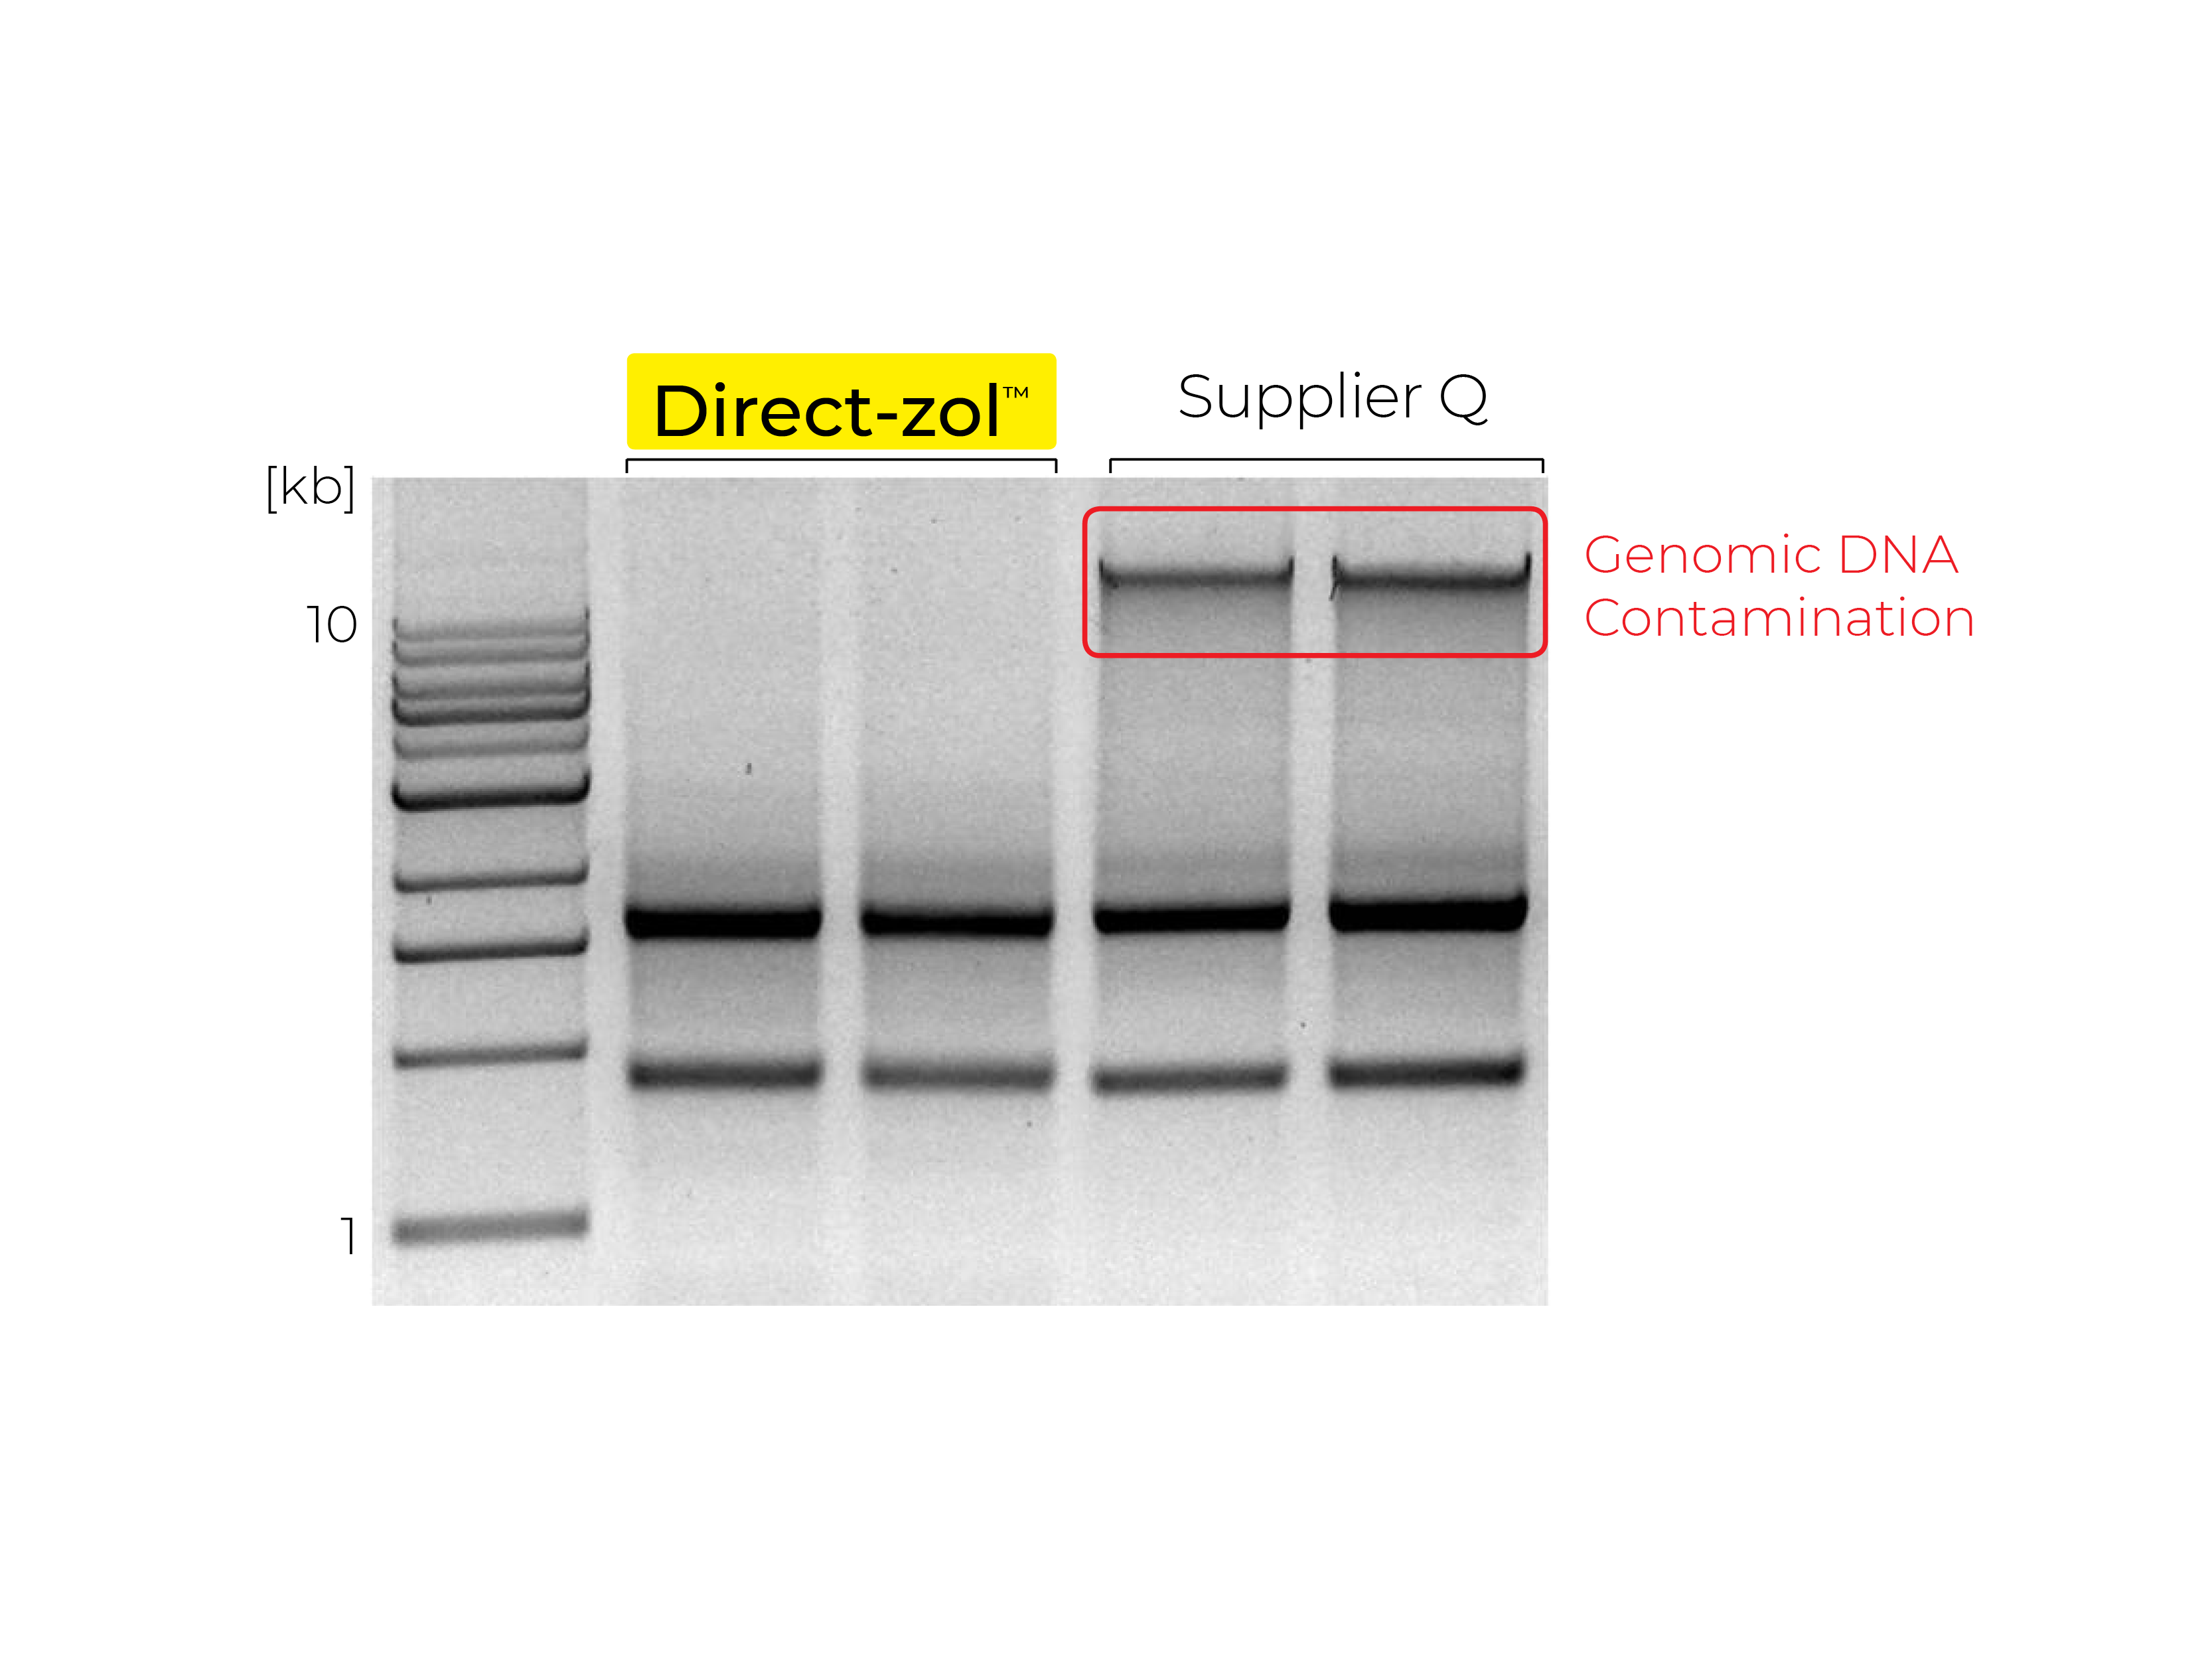 DNA contamination is seen as a high molecular weight band or smear from TRIzol samples
                extracted with a Supplier Q kit